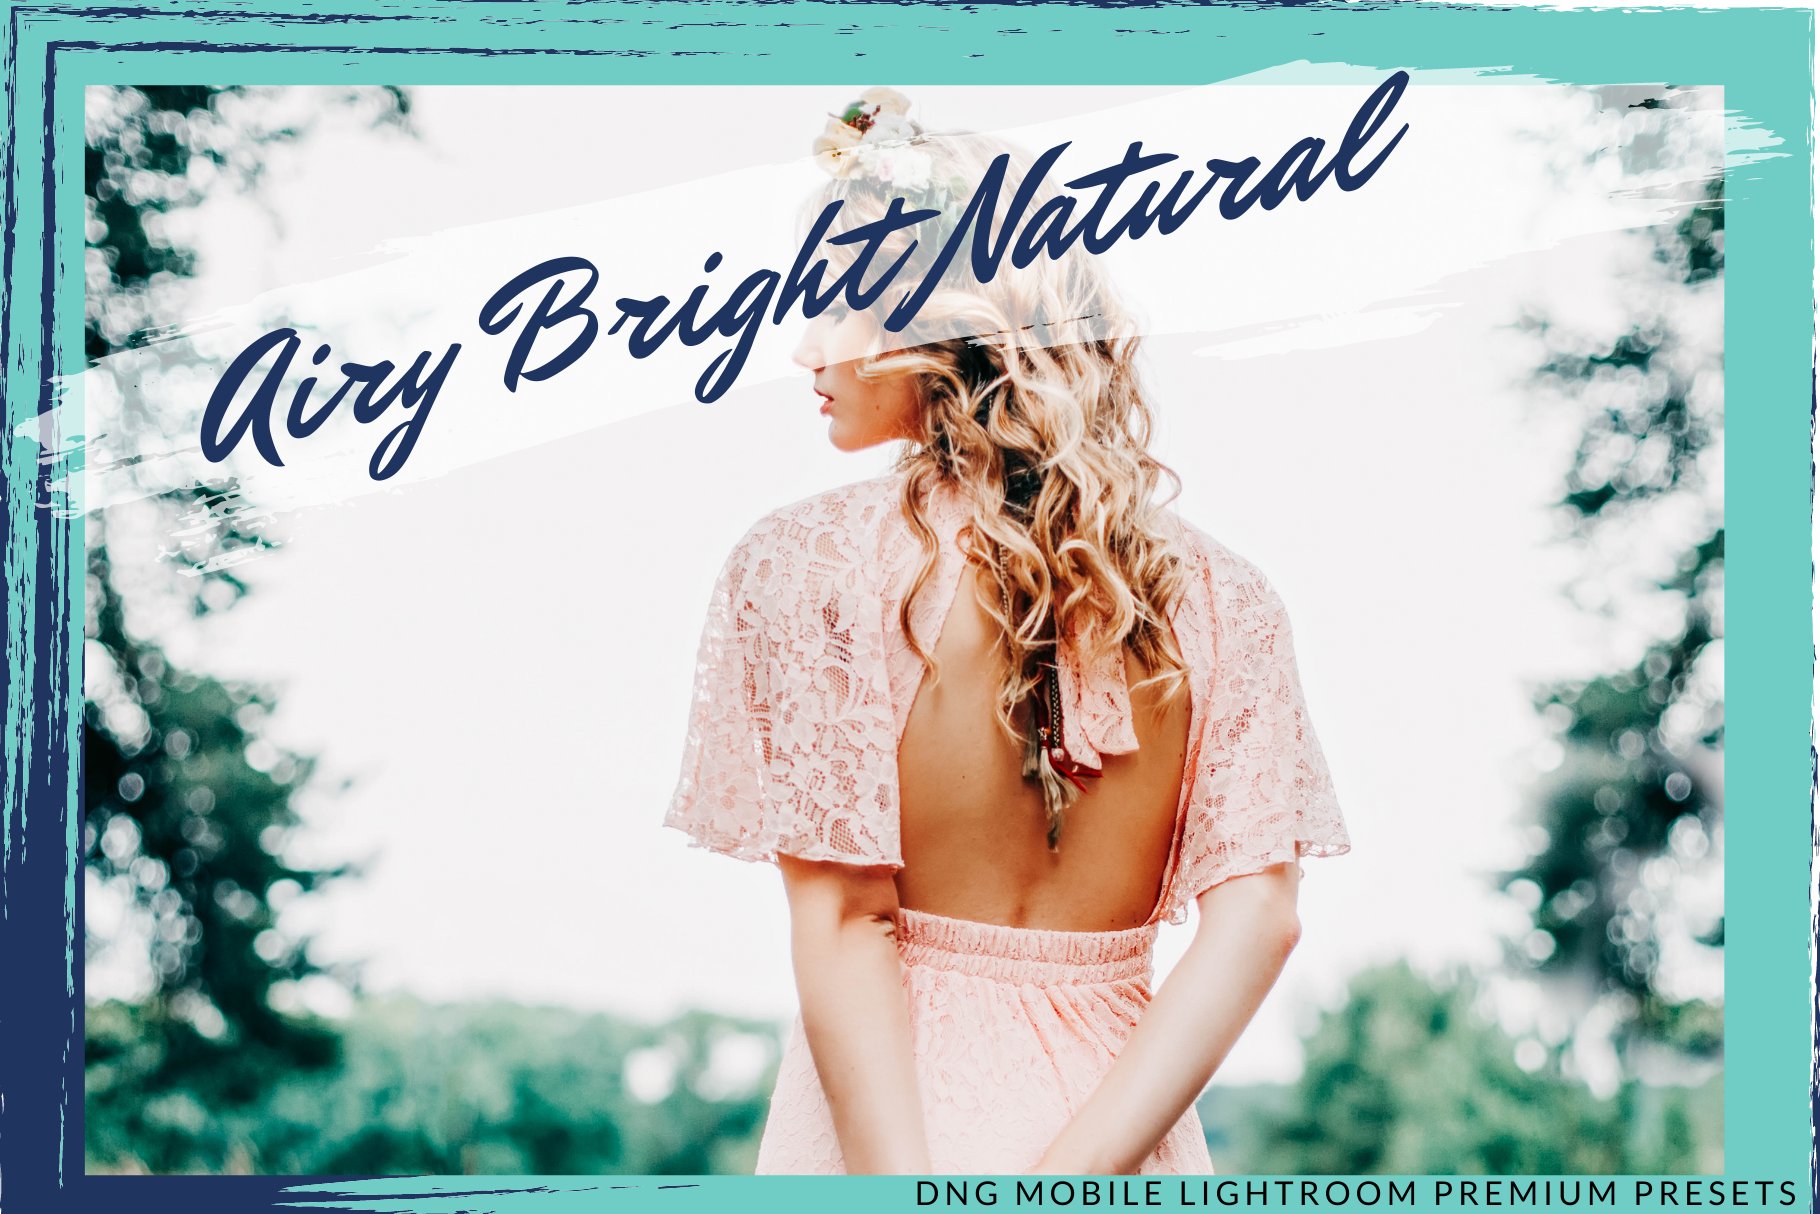 AIRY BRIGHT NATURAL LIGHTROOM PRESETcover image.